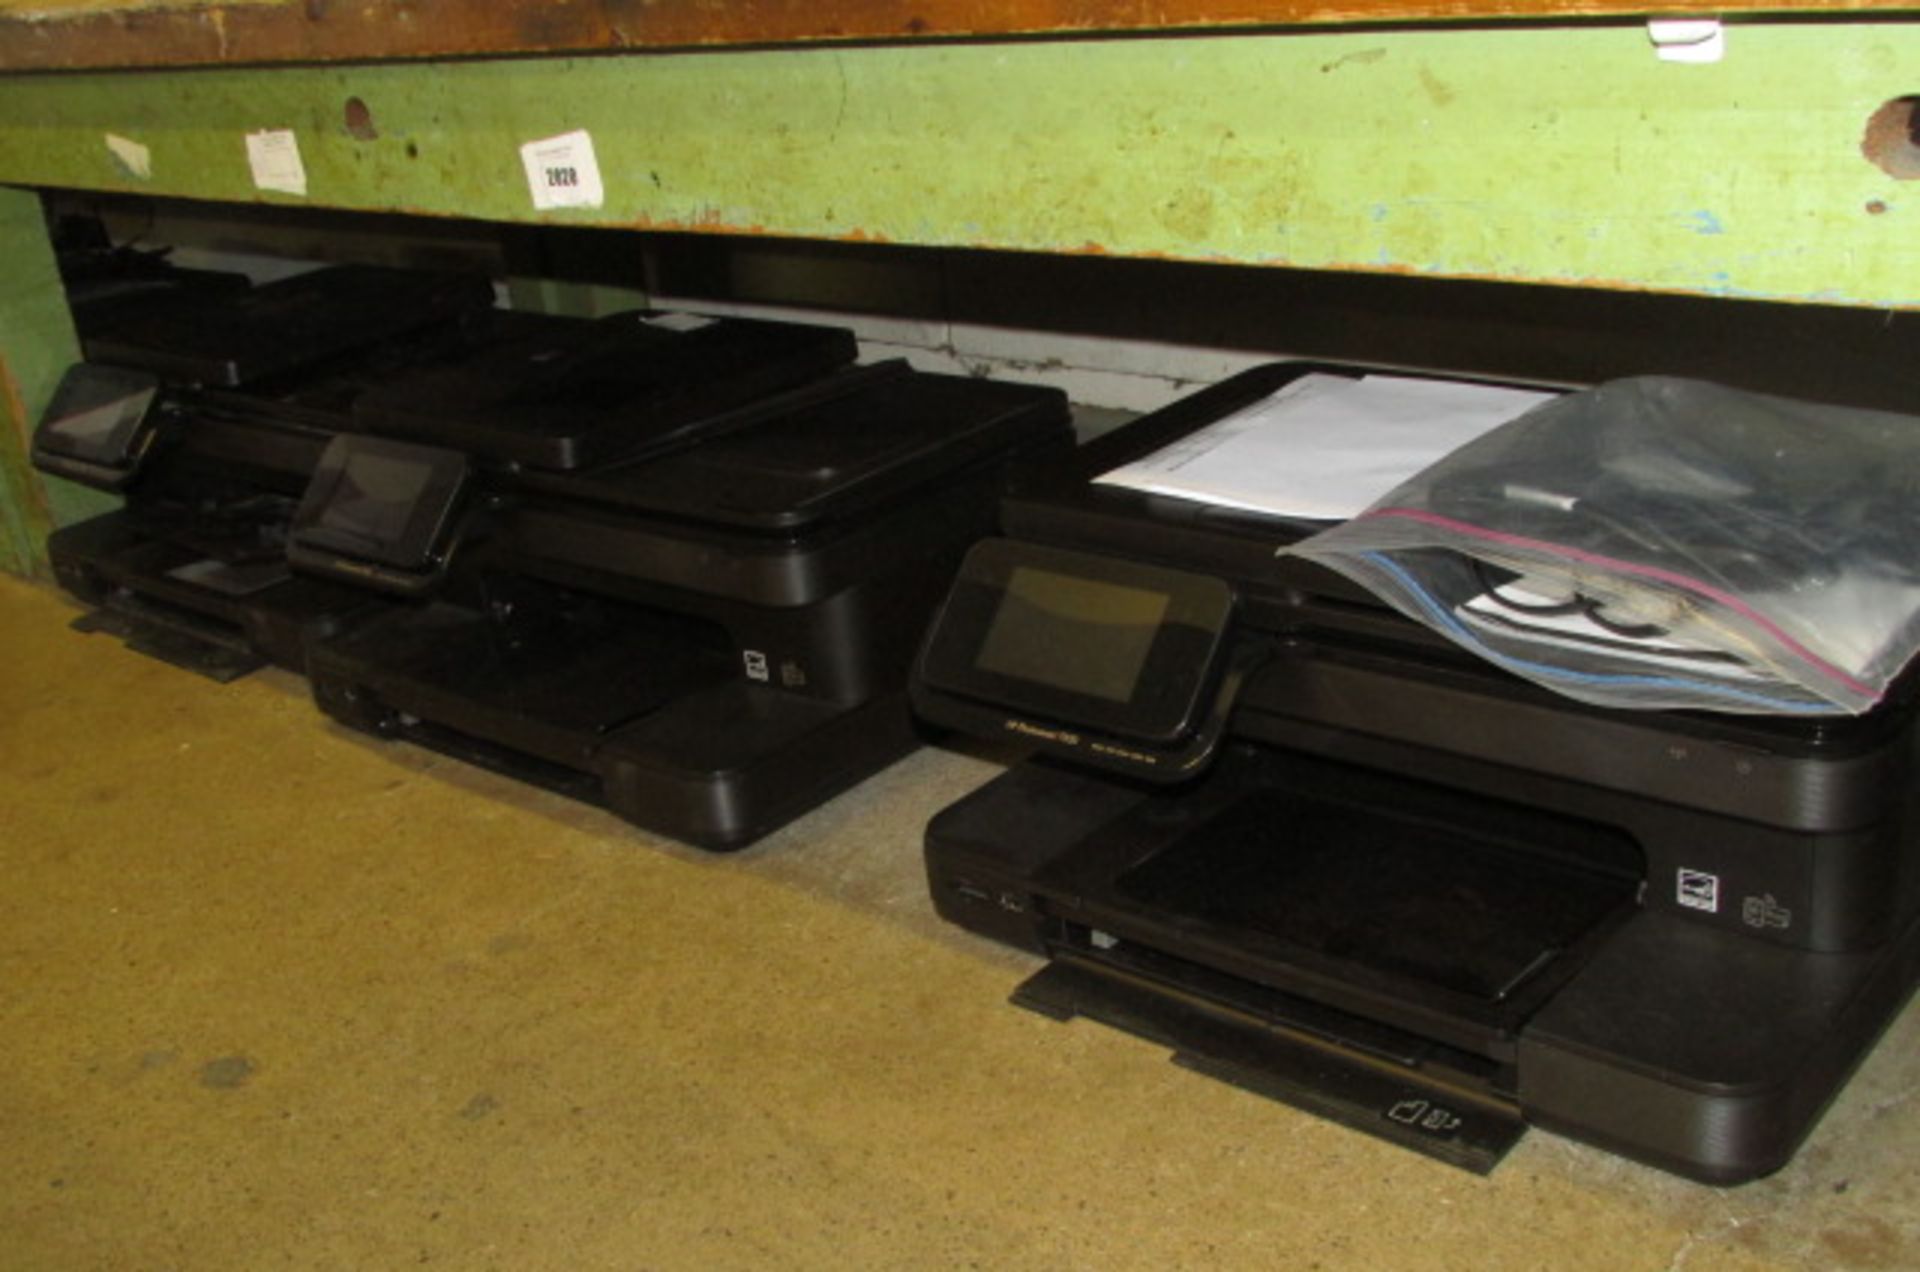 3 HP Photosmart 7520 wireless all in one printers